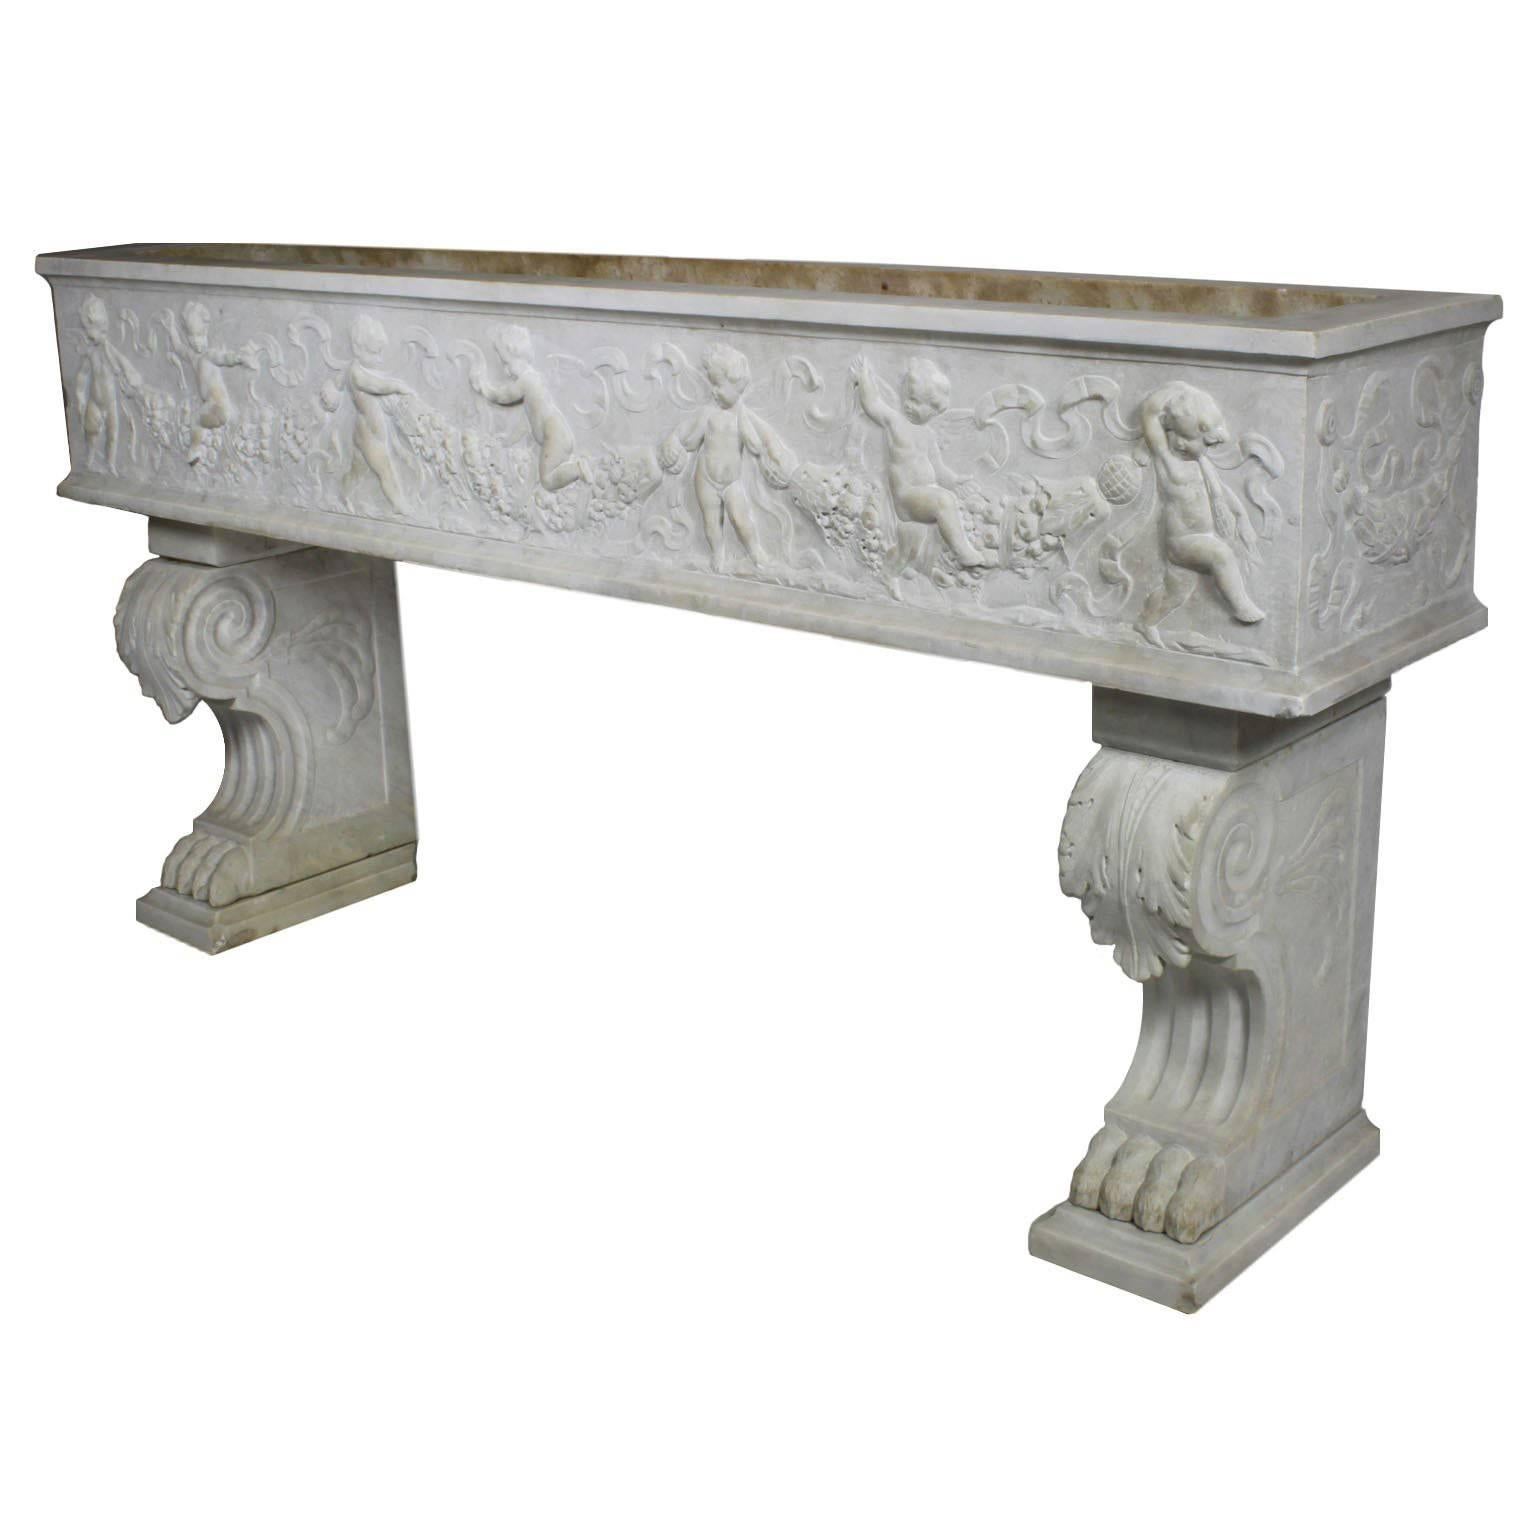 French 19th Century, Whimsical Rococo Style Marble Carved Planter with Cherubs